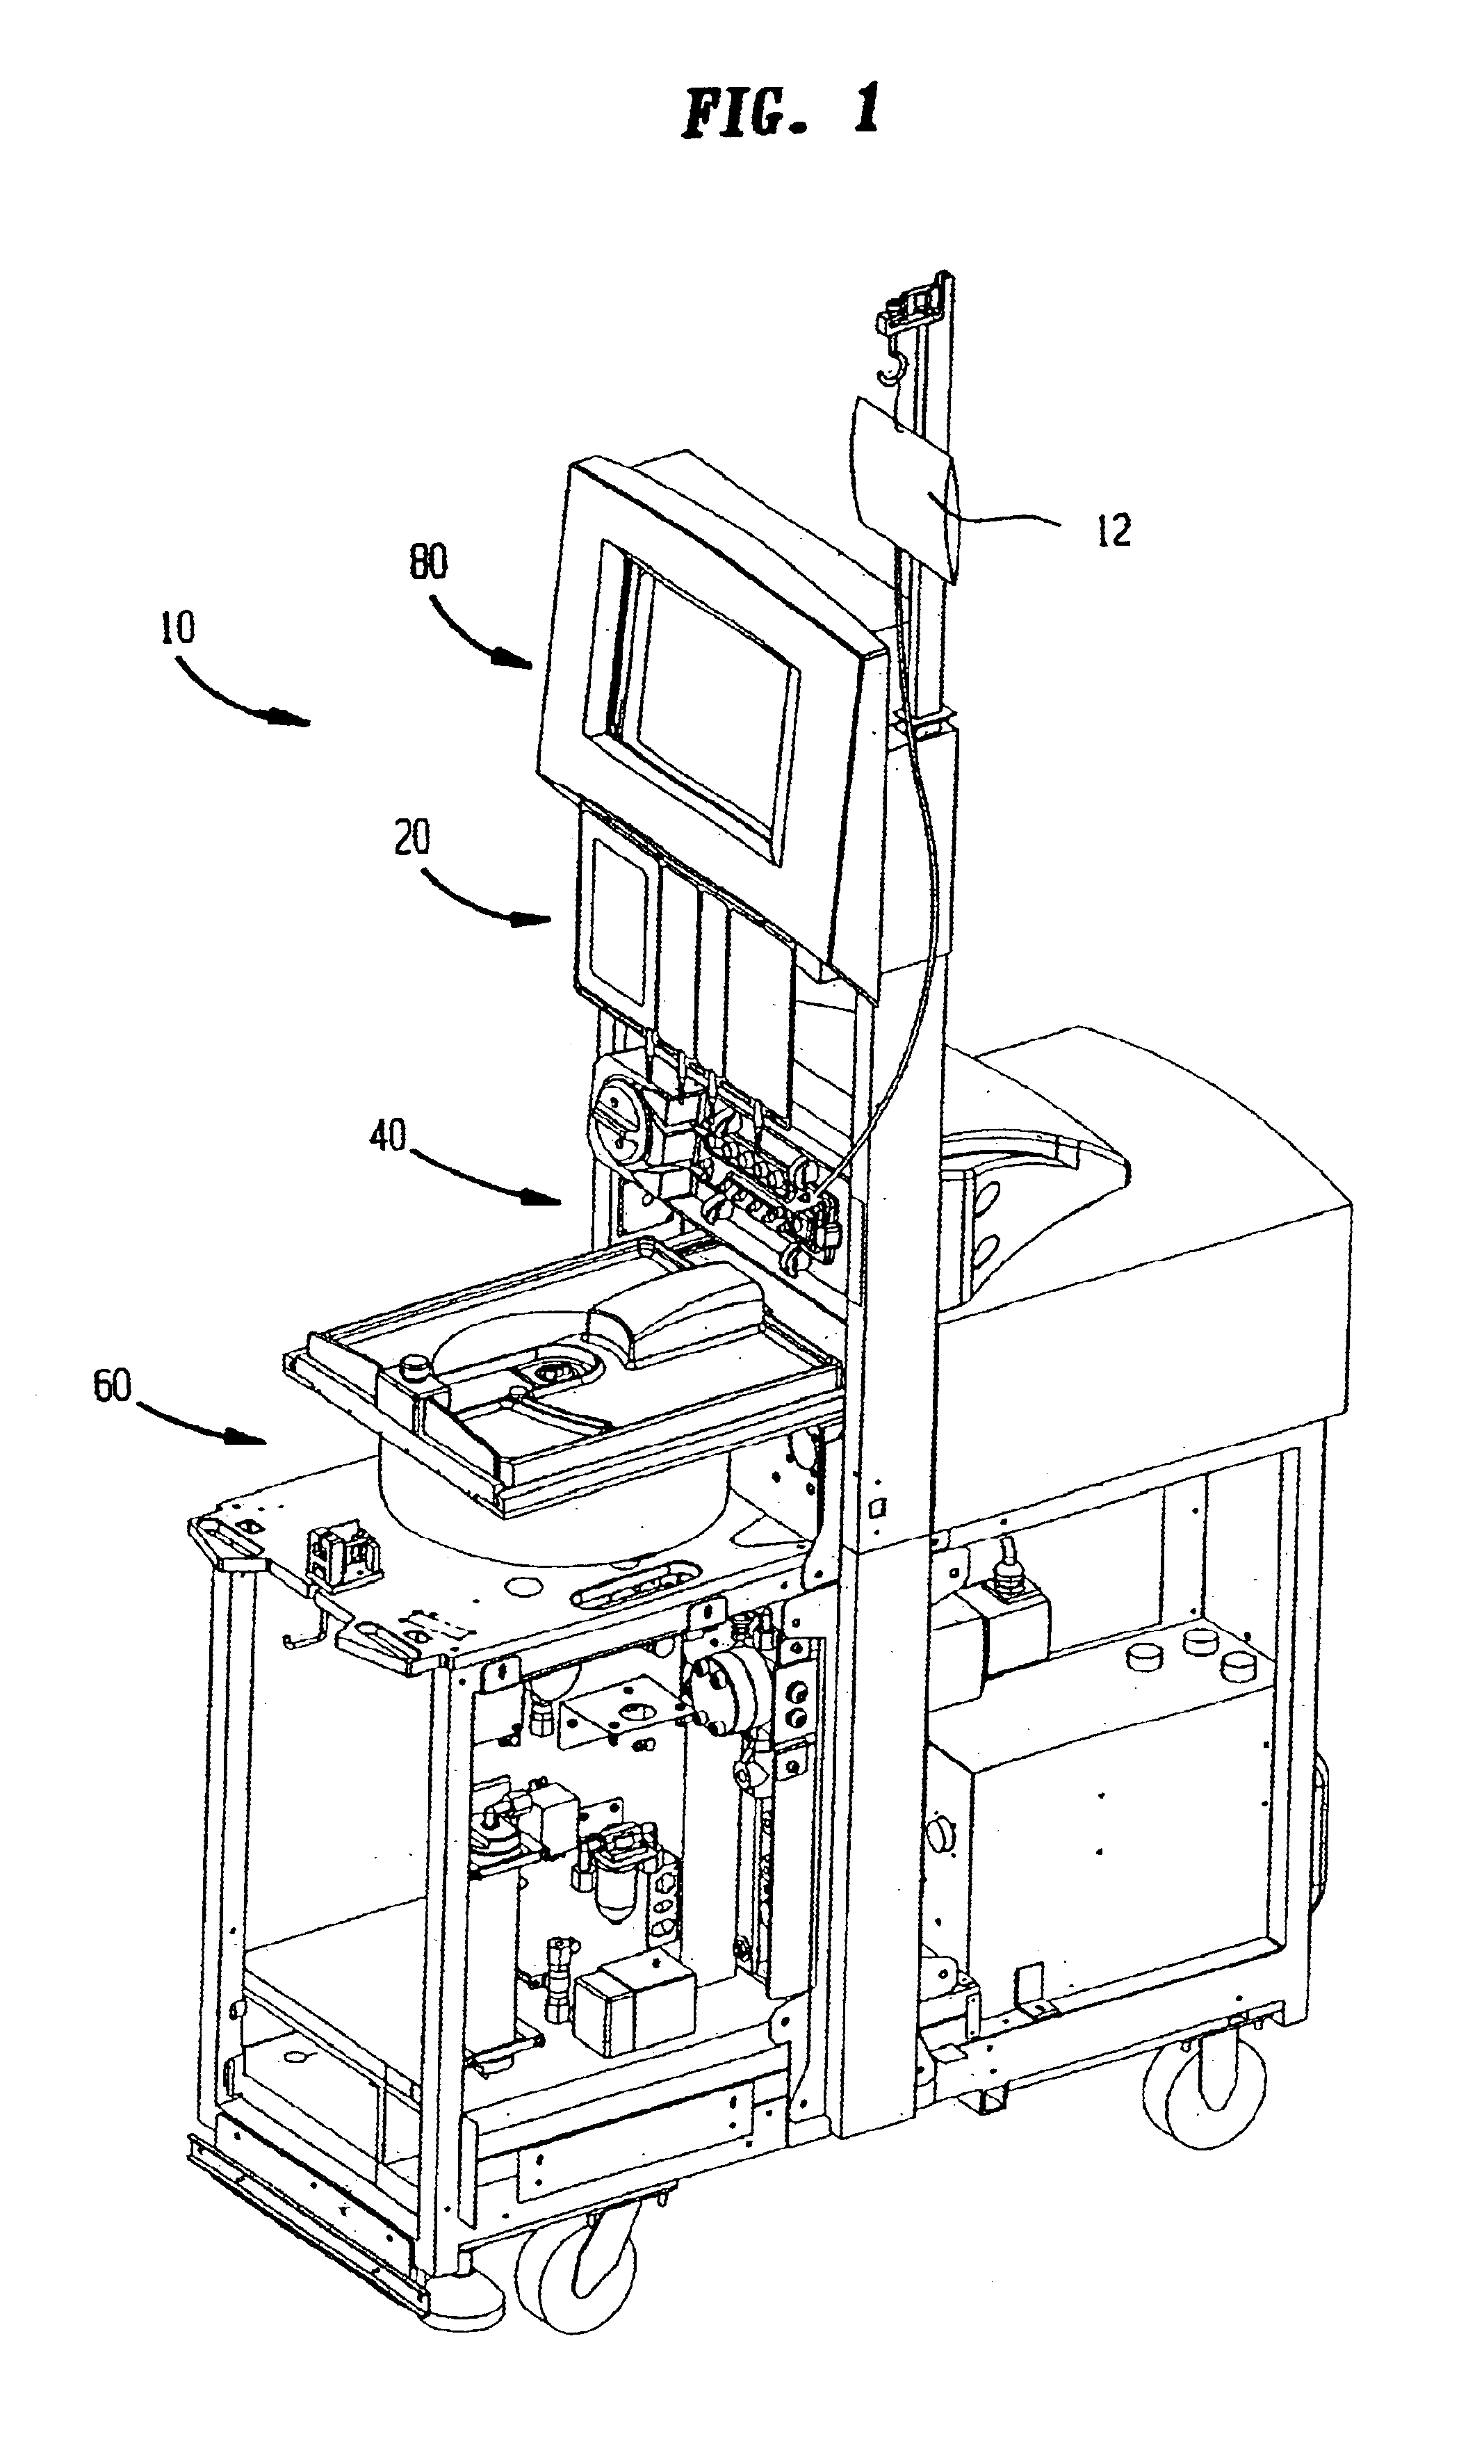 Biological processing apparatus for expressing fluid material